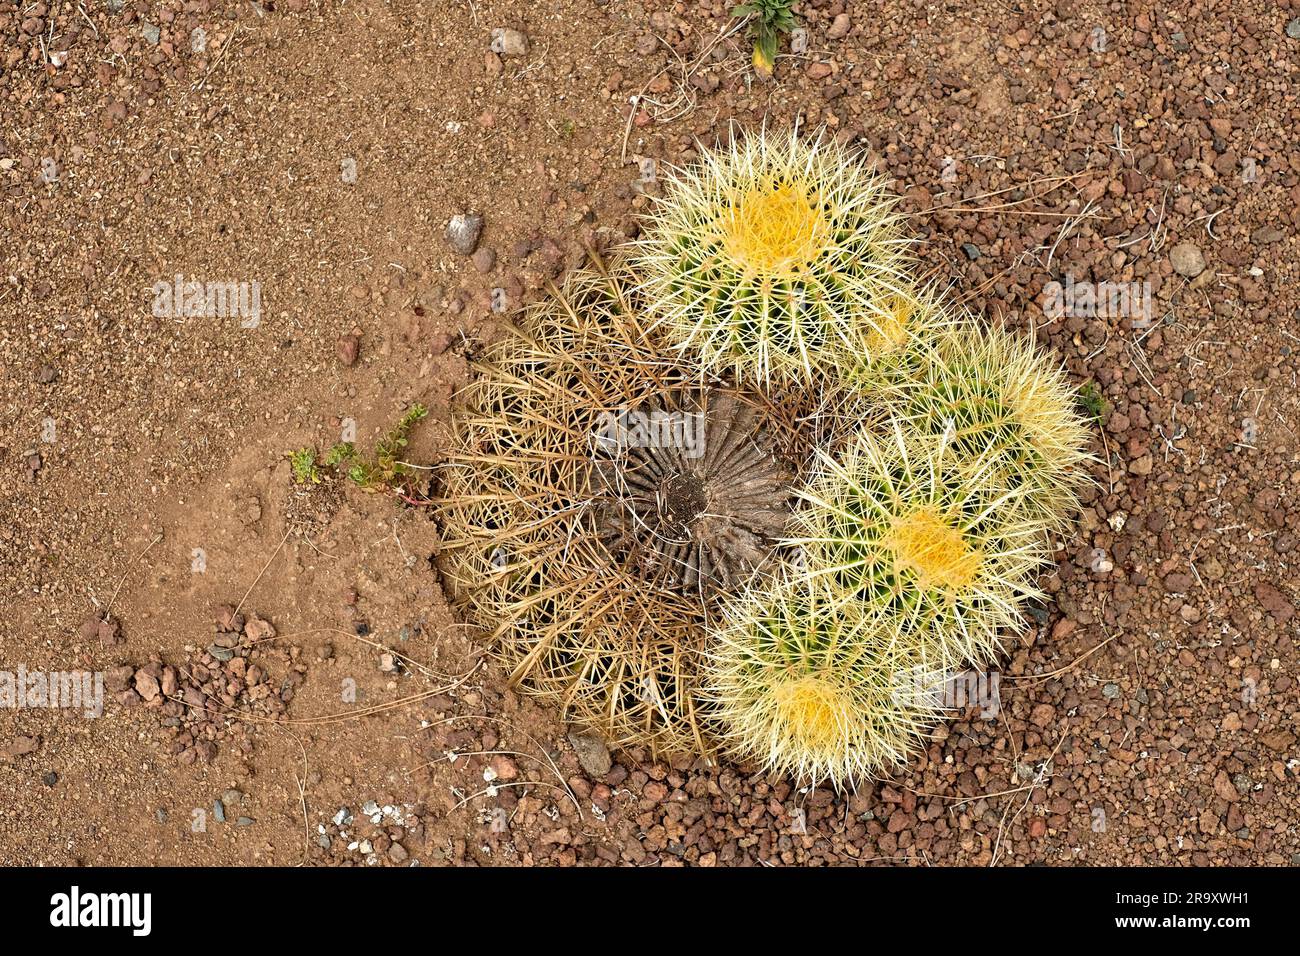 The young and the old, young succulent plants grow out of an old dead plant. Stock Photo